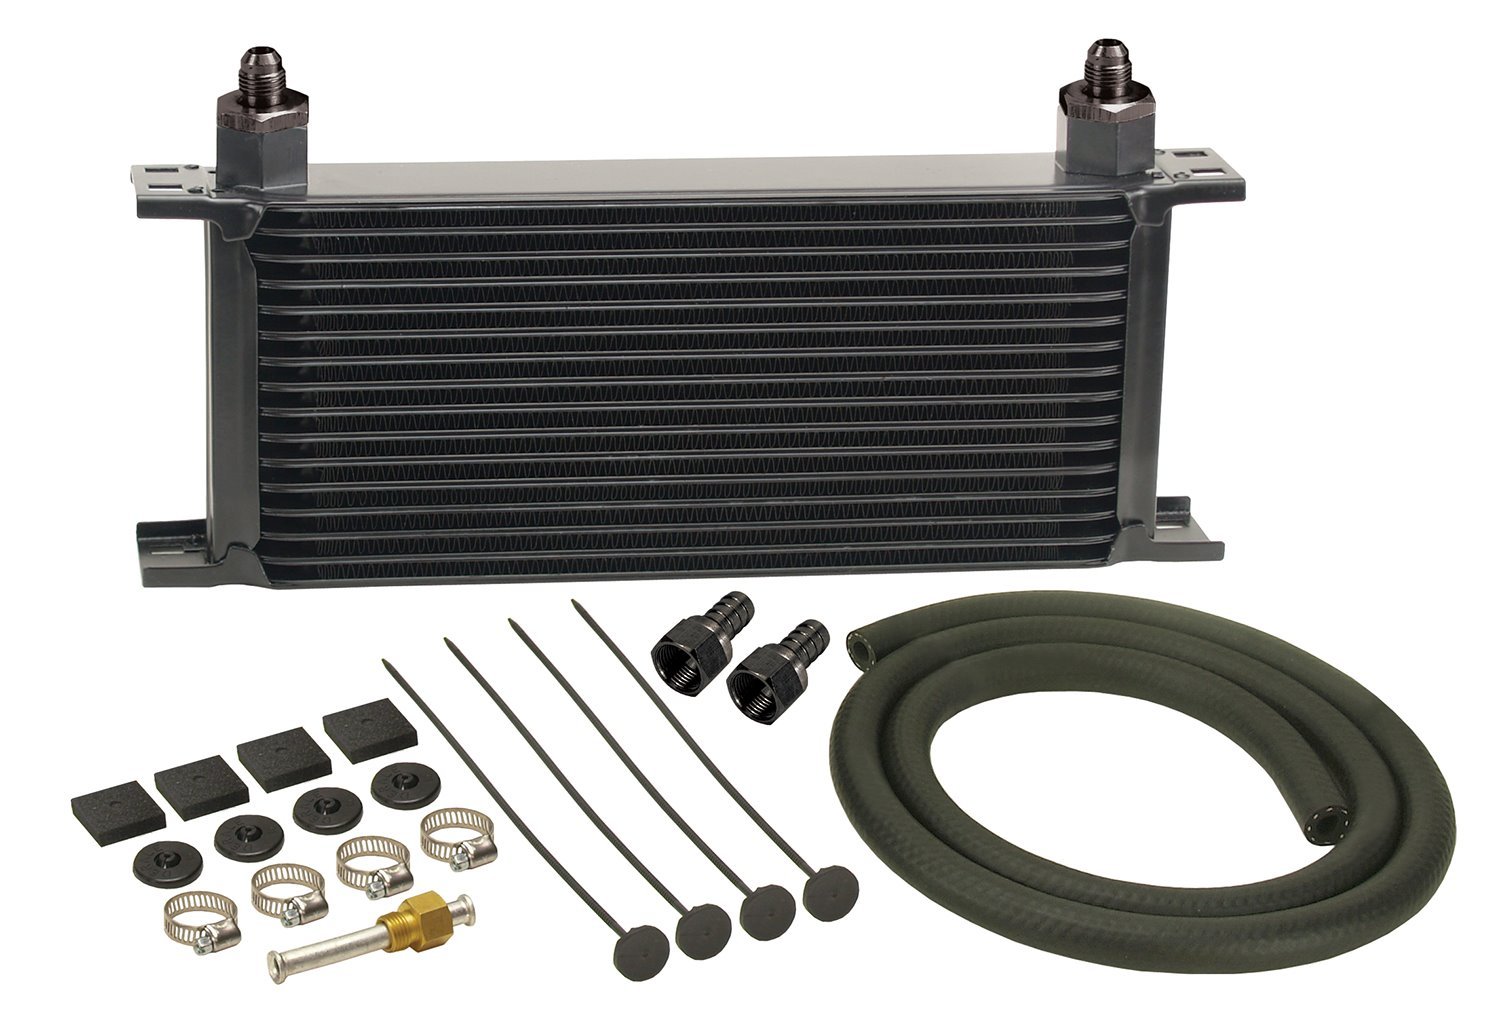 Derale 13402 16 Row Stacked Plate Transmission Cooler Kit